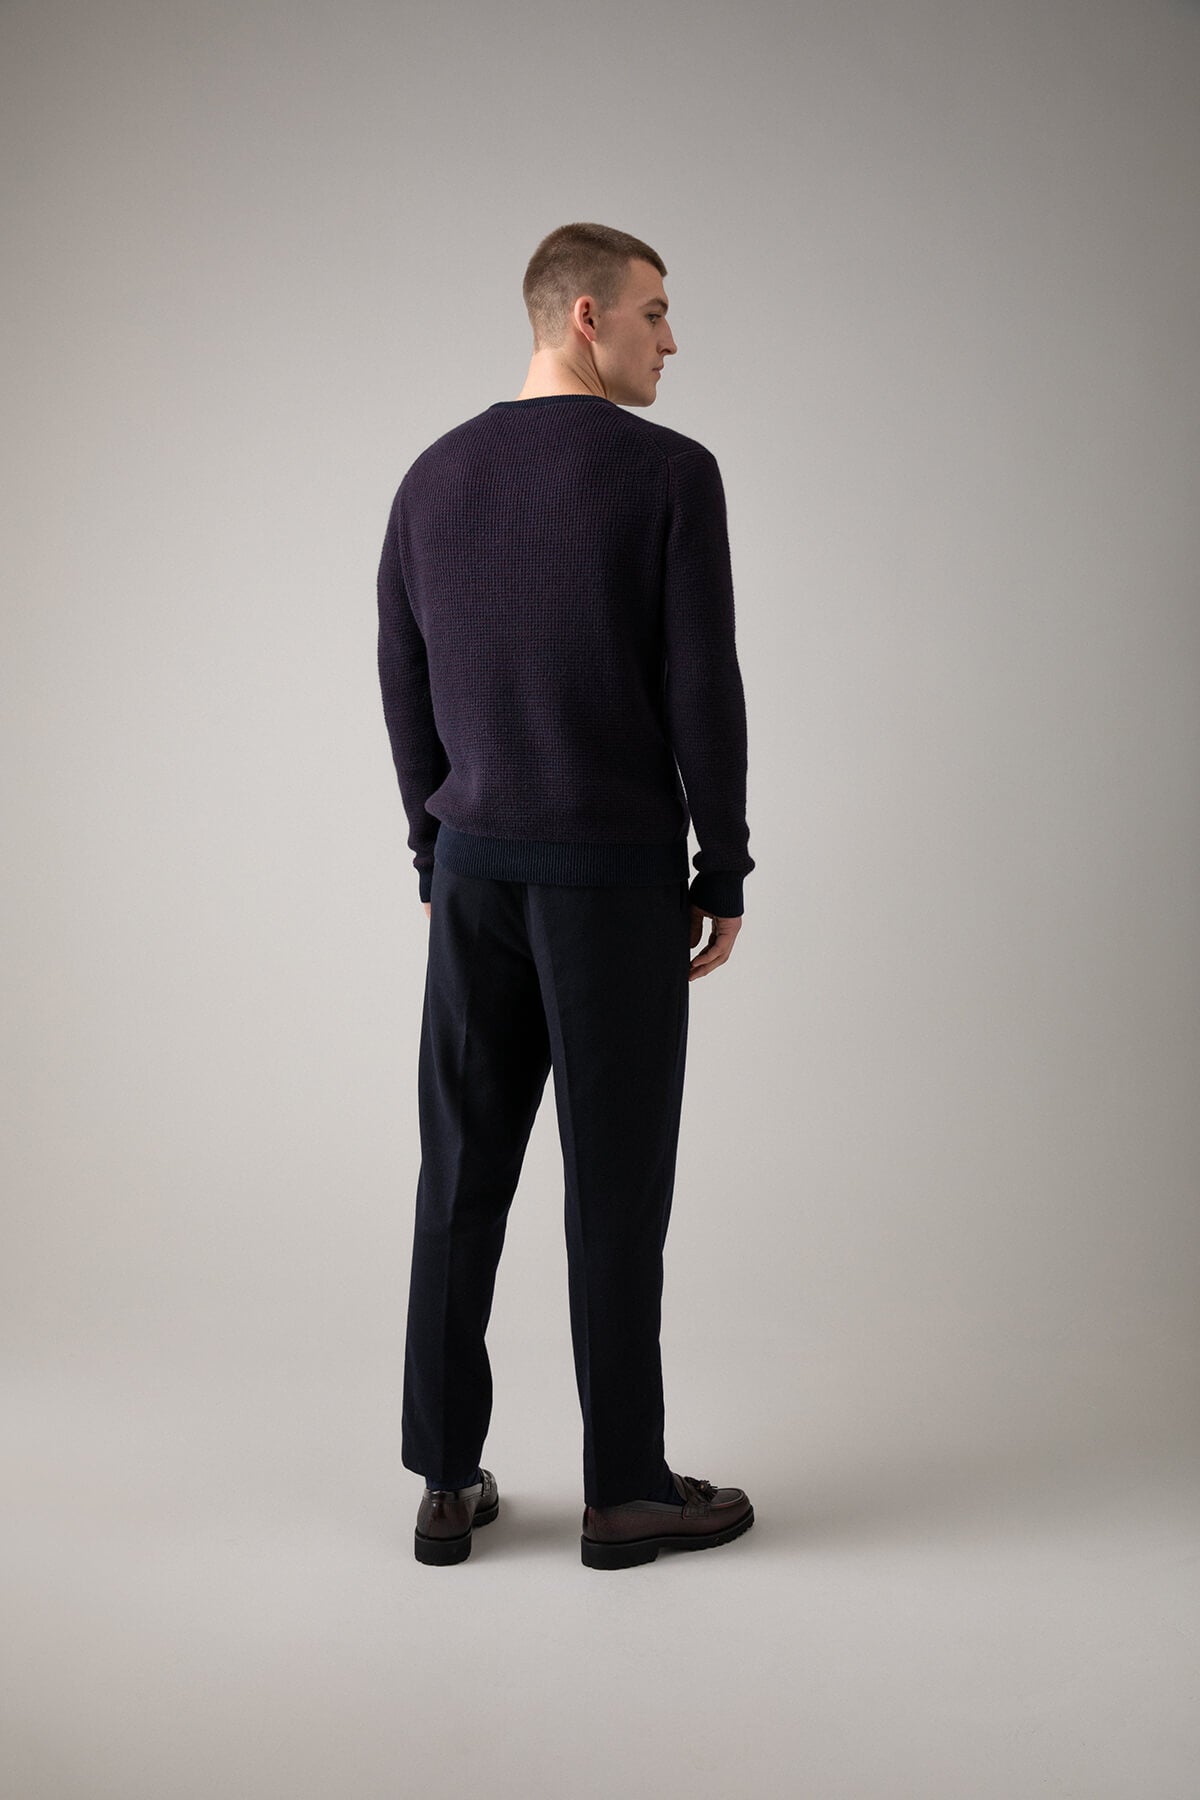 Johnstons of Elgin’s Men's Textured Waffle Rib Cashmere Jumper in Bramble on model wearing navy trousers on a grey background KAA05042Q23701